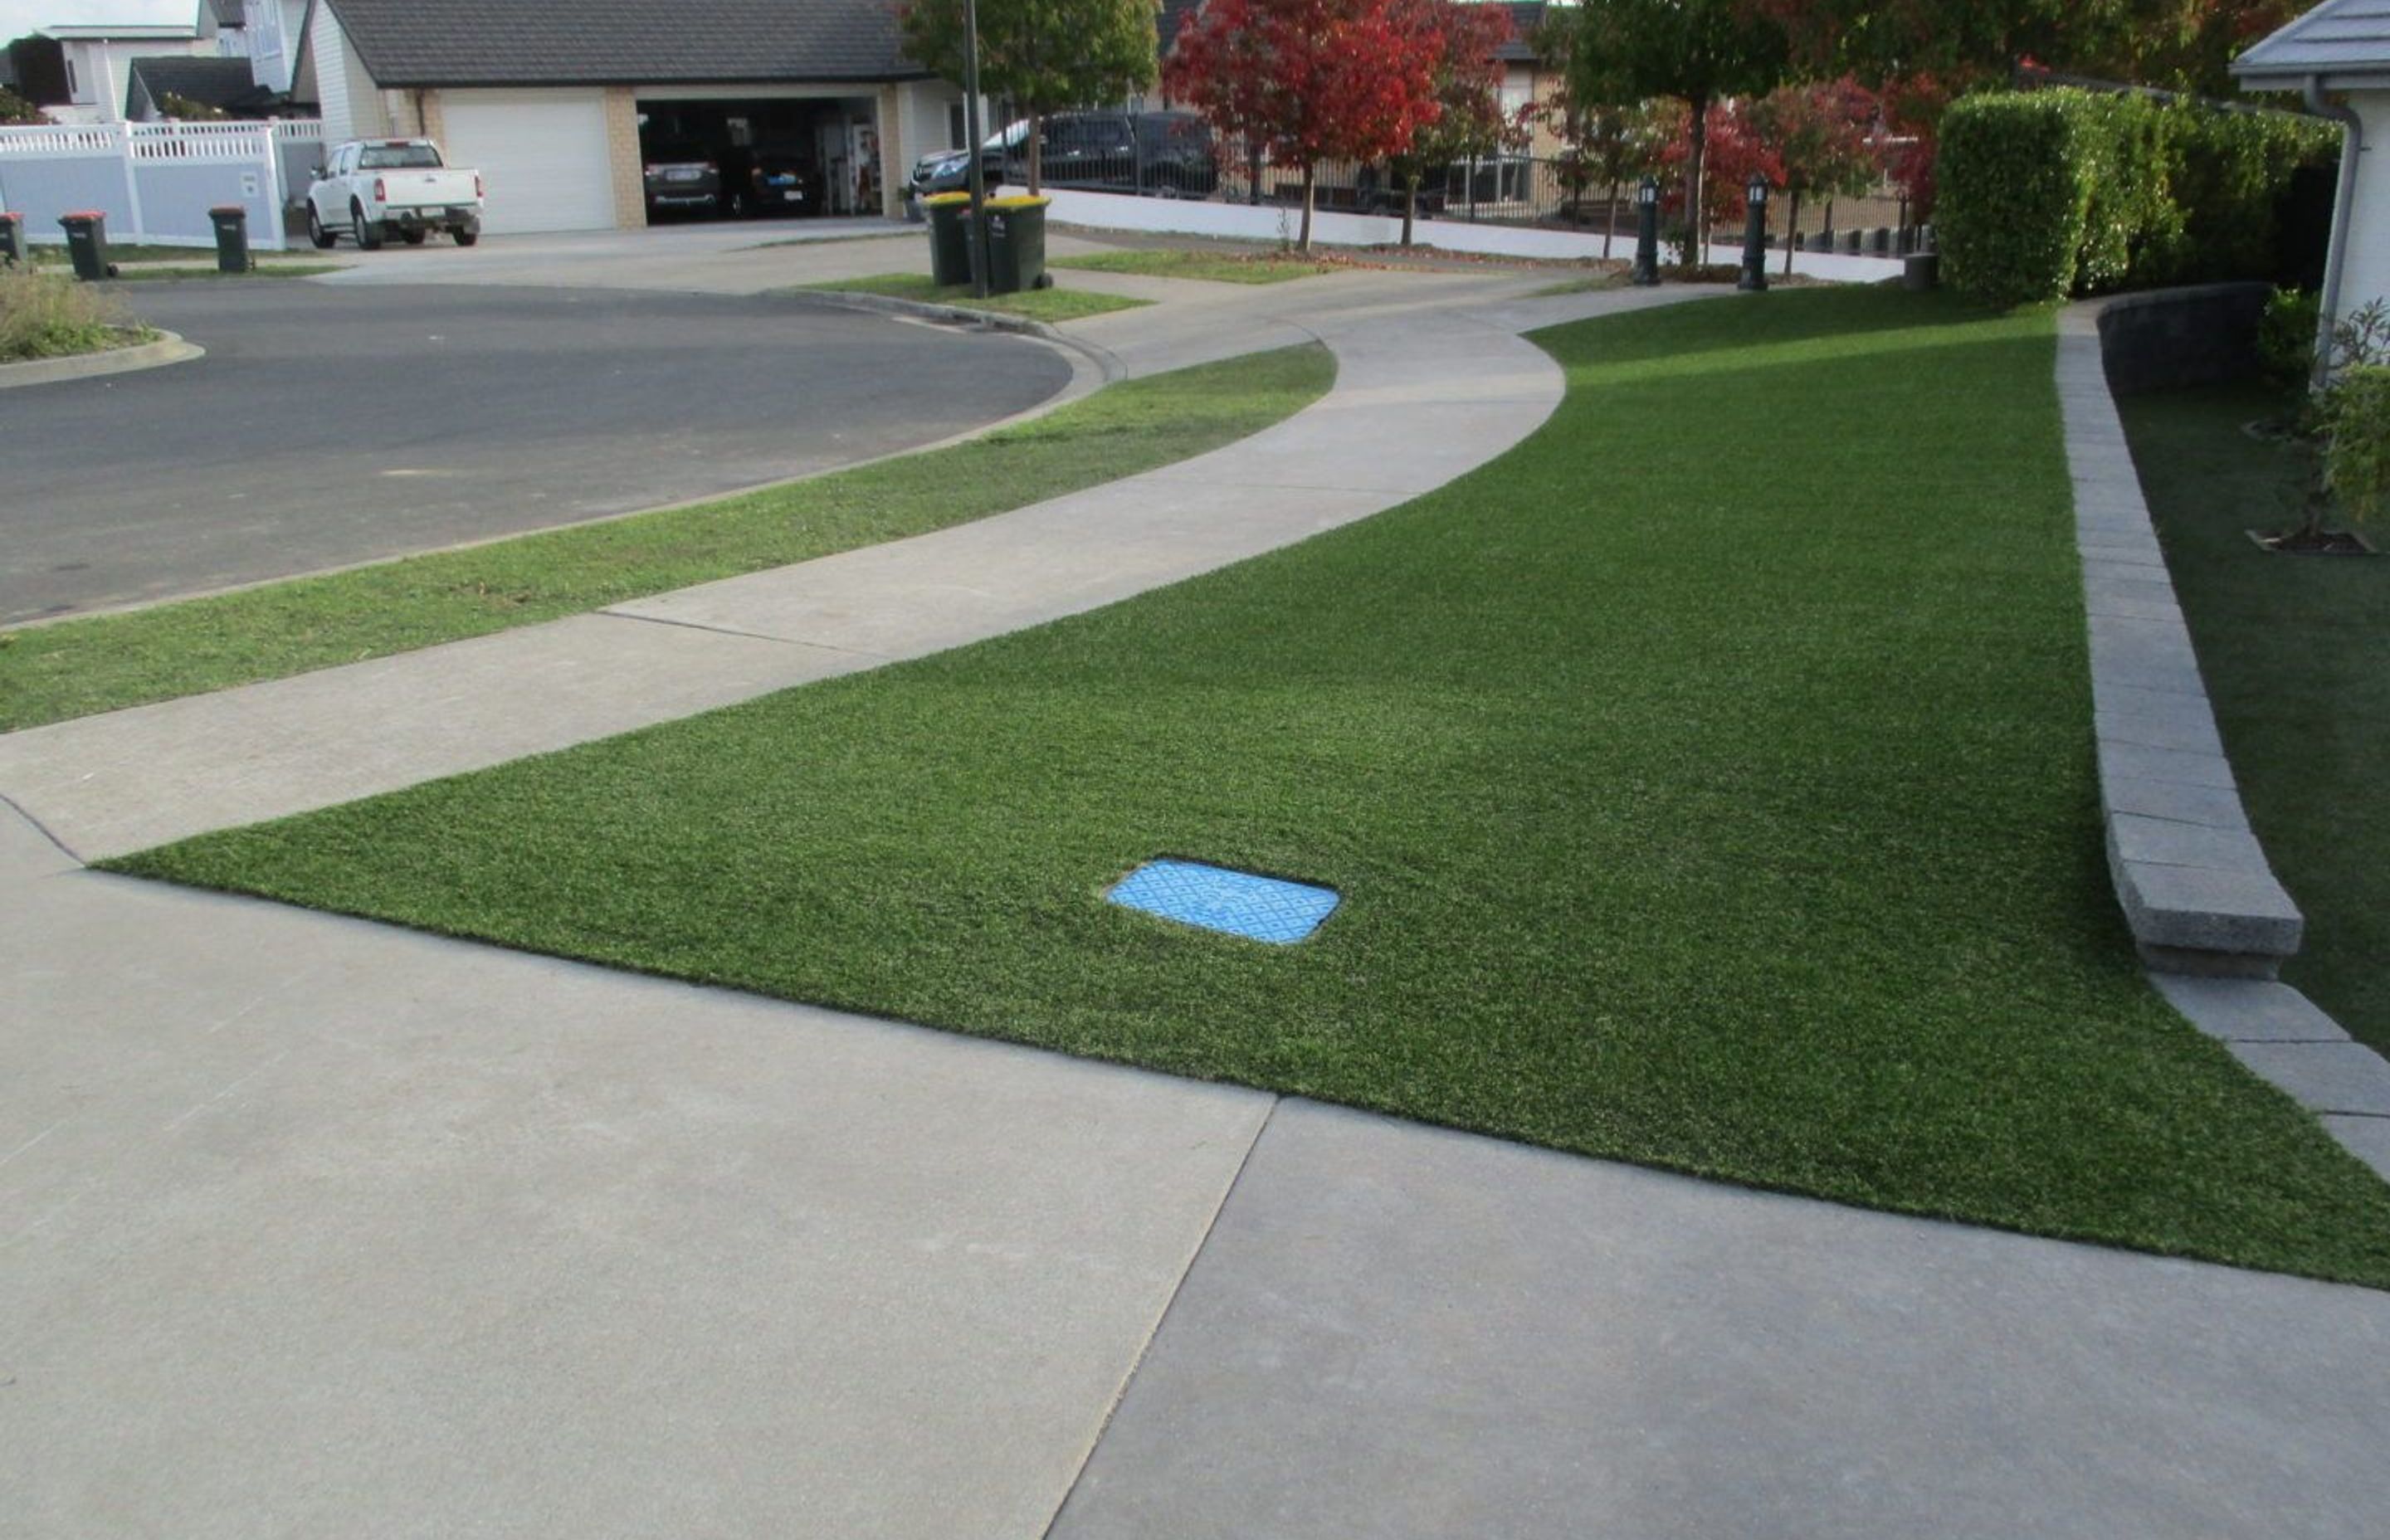 TigerTurf Indian Summer lawn adds grace to your home and brings you lasting benefits